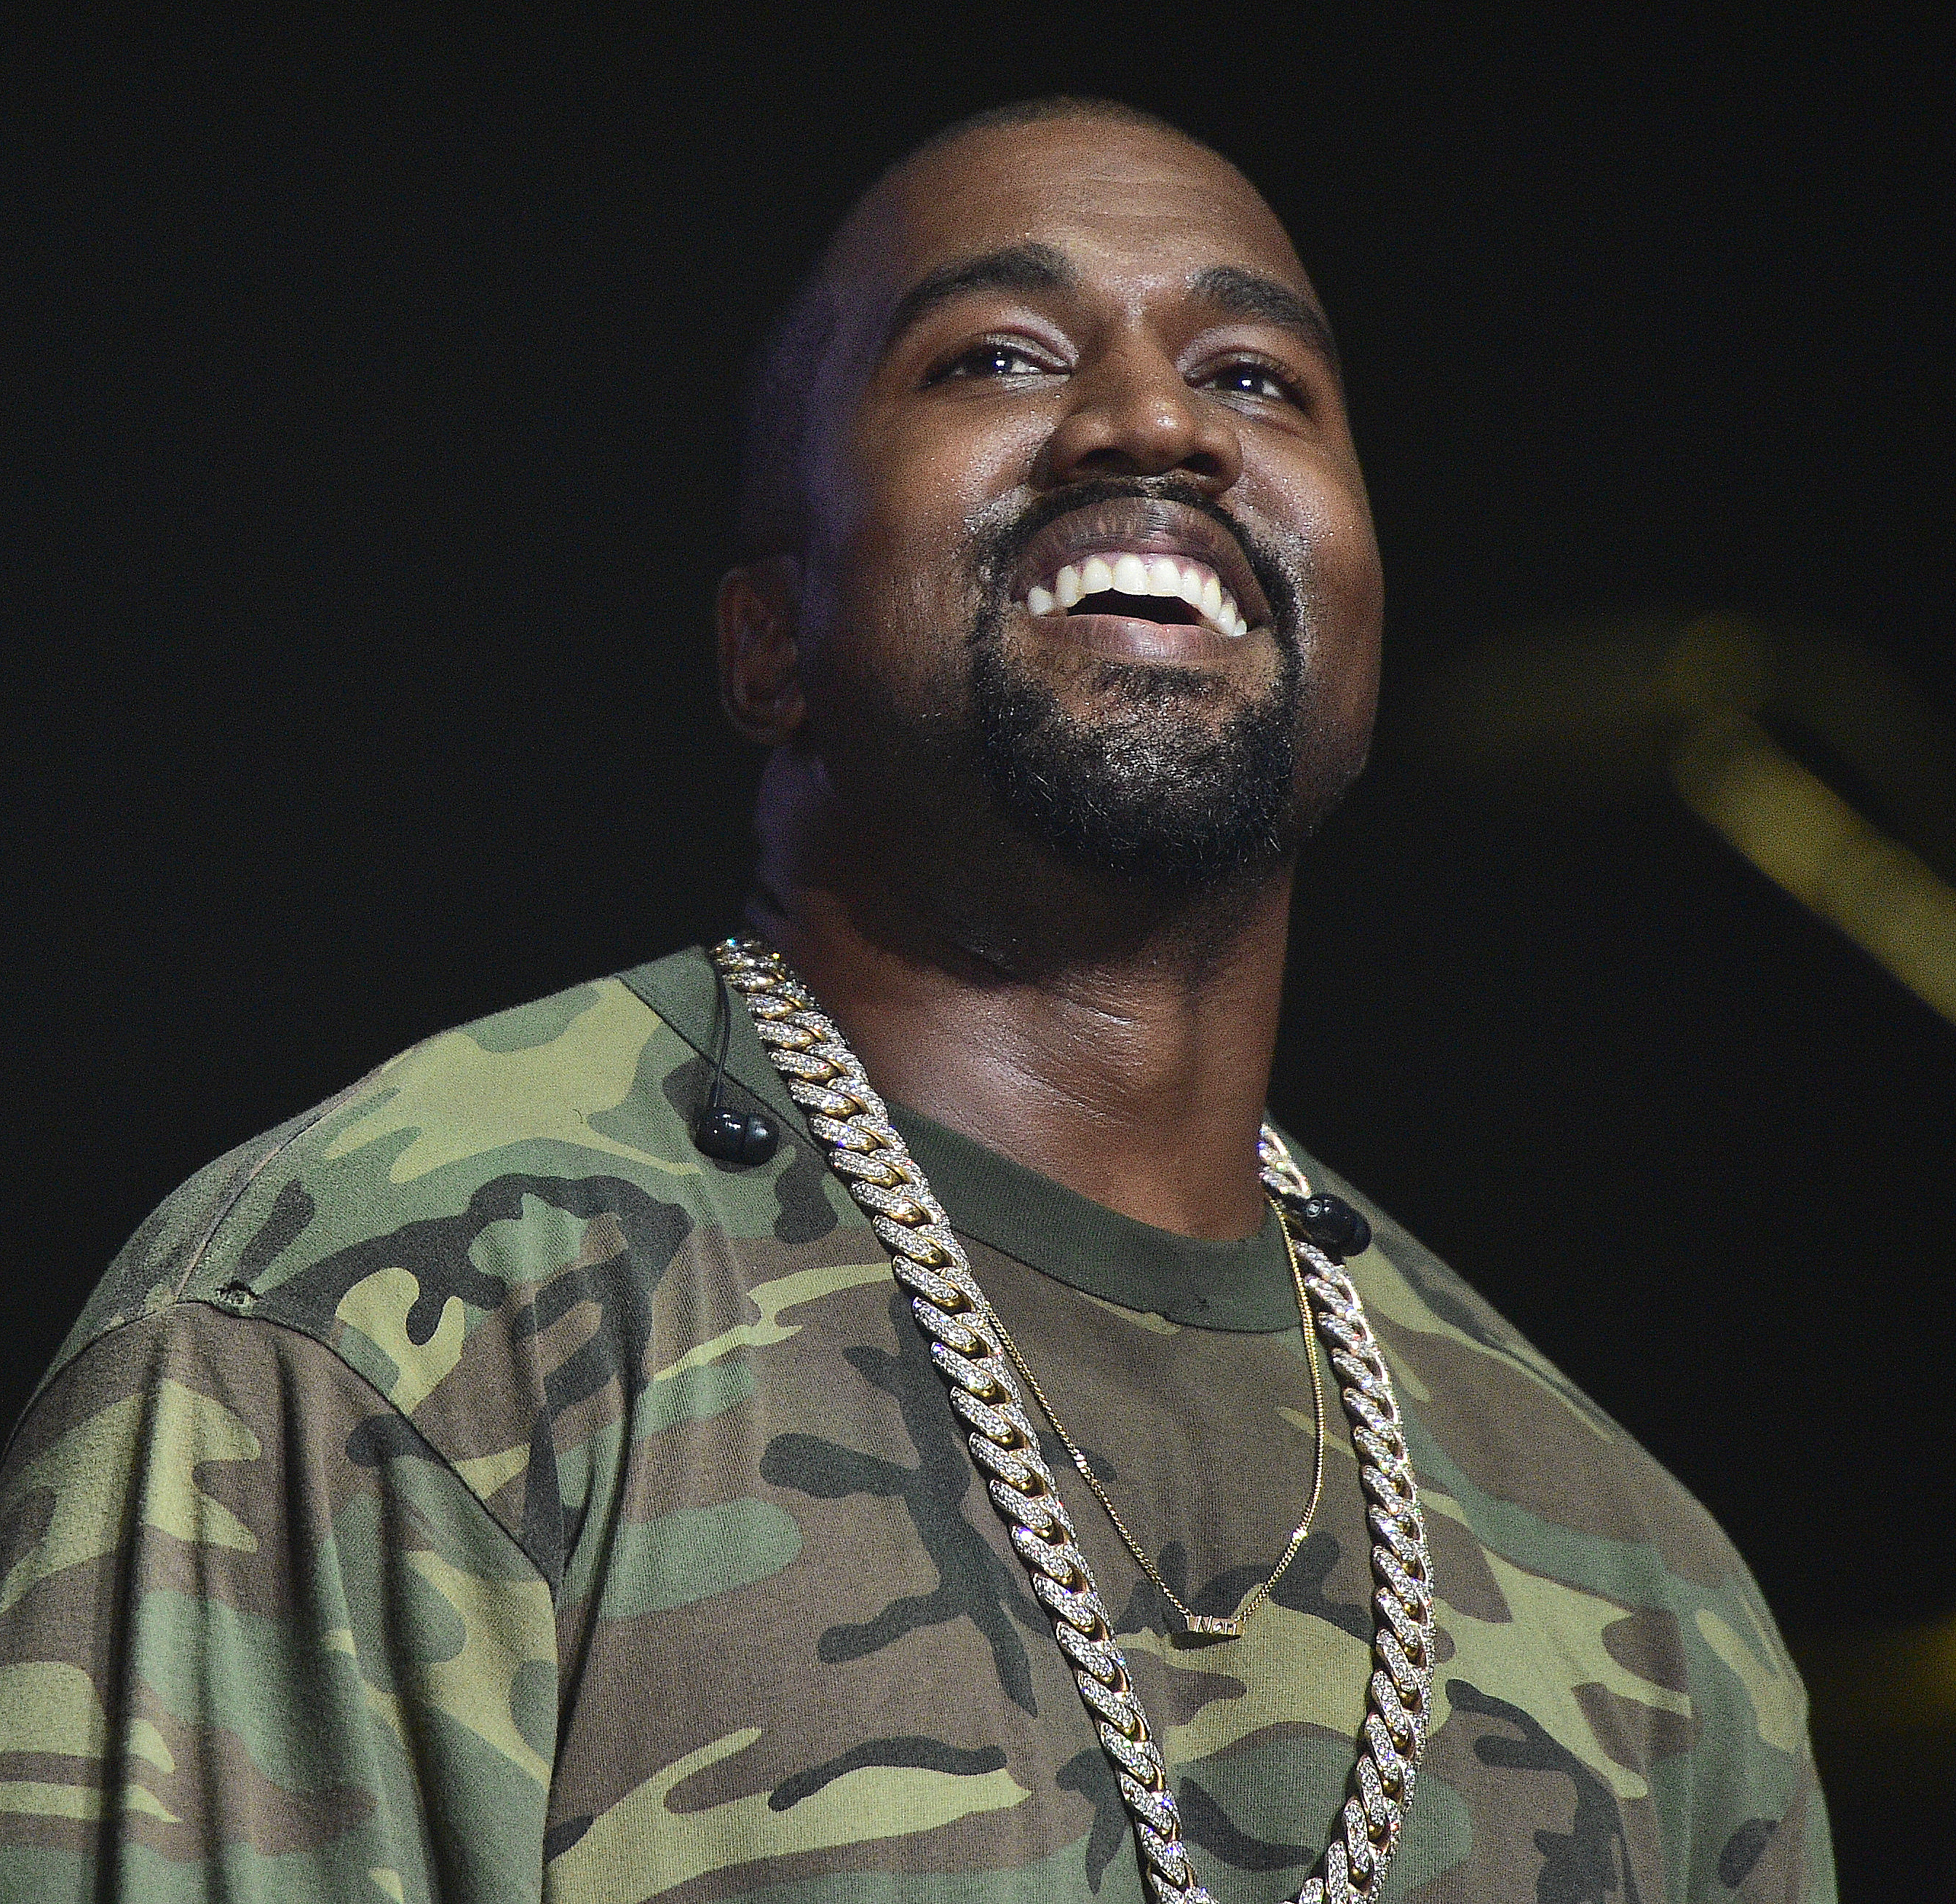 Kanye West performs at Jeezy Presents TM101: 10 Year Anniversary Concert at The Fox Theatre on July 25, 2015 in Atlanta, Georgia. (Prince Williams—WireImage/Getty Images)